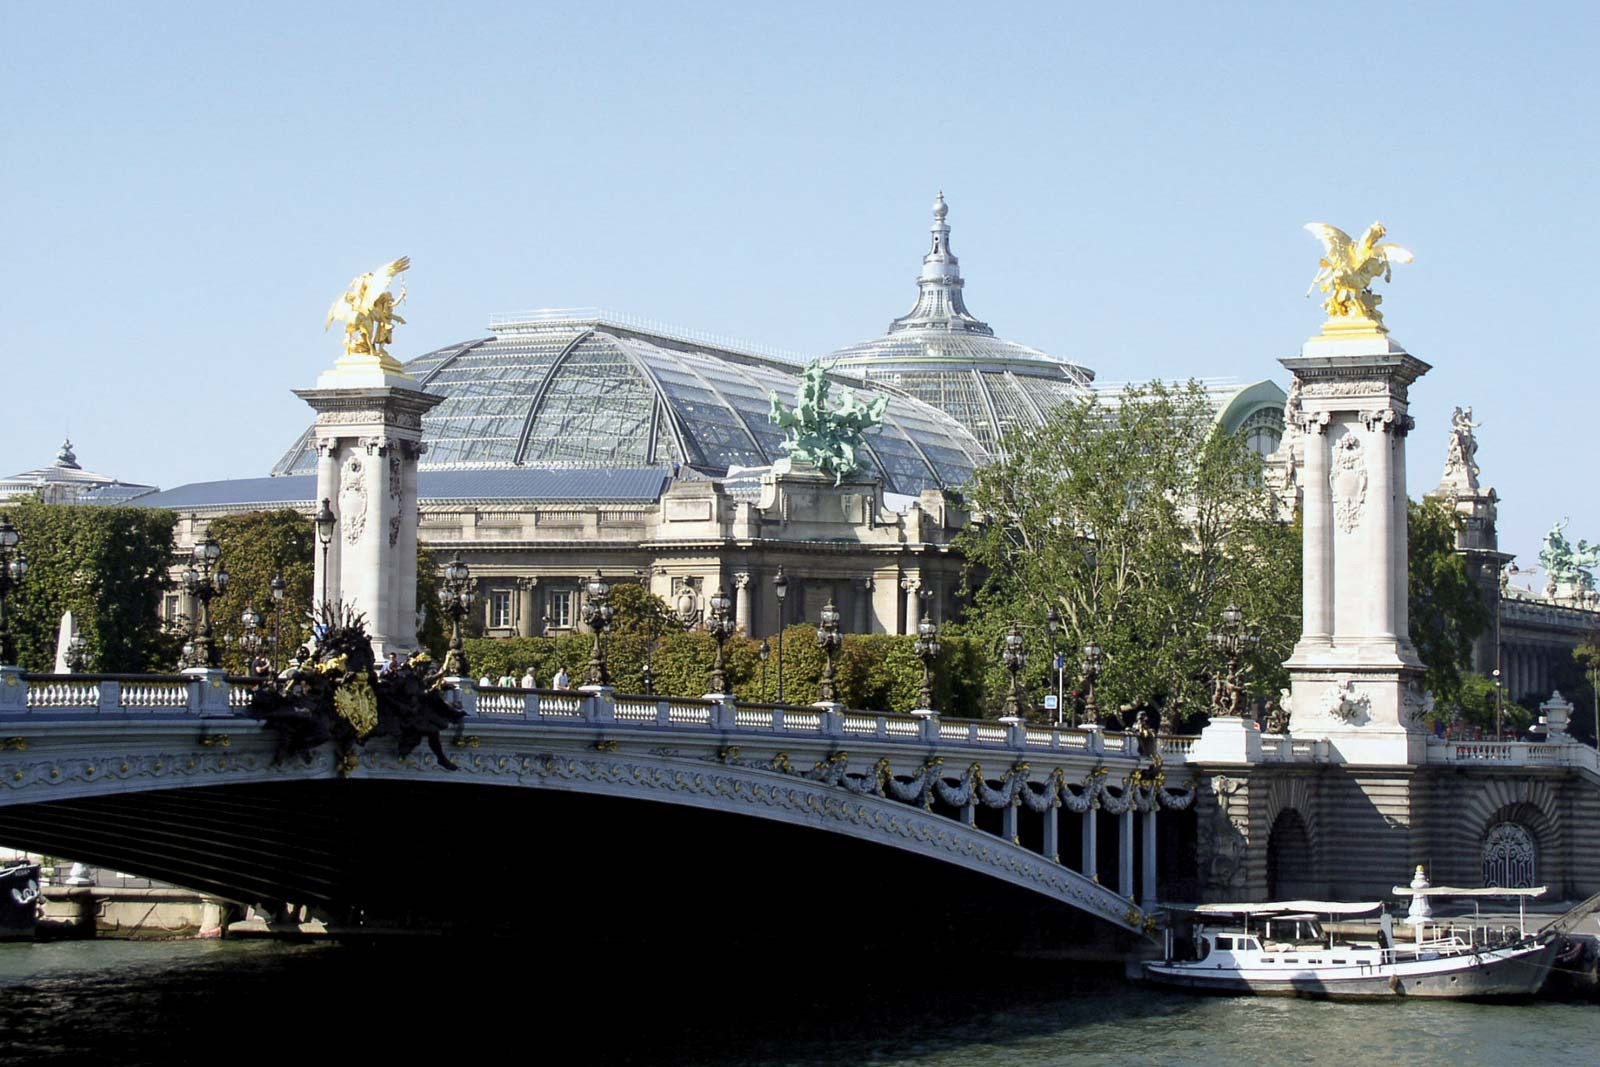 Paris 2024 still plan to use iconic Grand Palais as doubts emerge over renovation plans